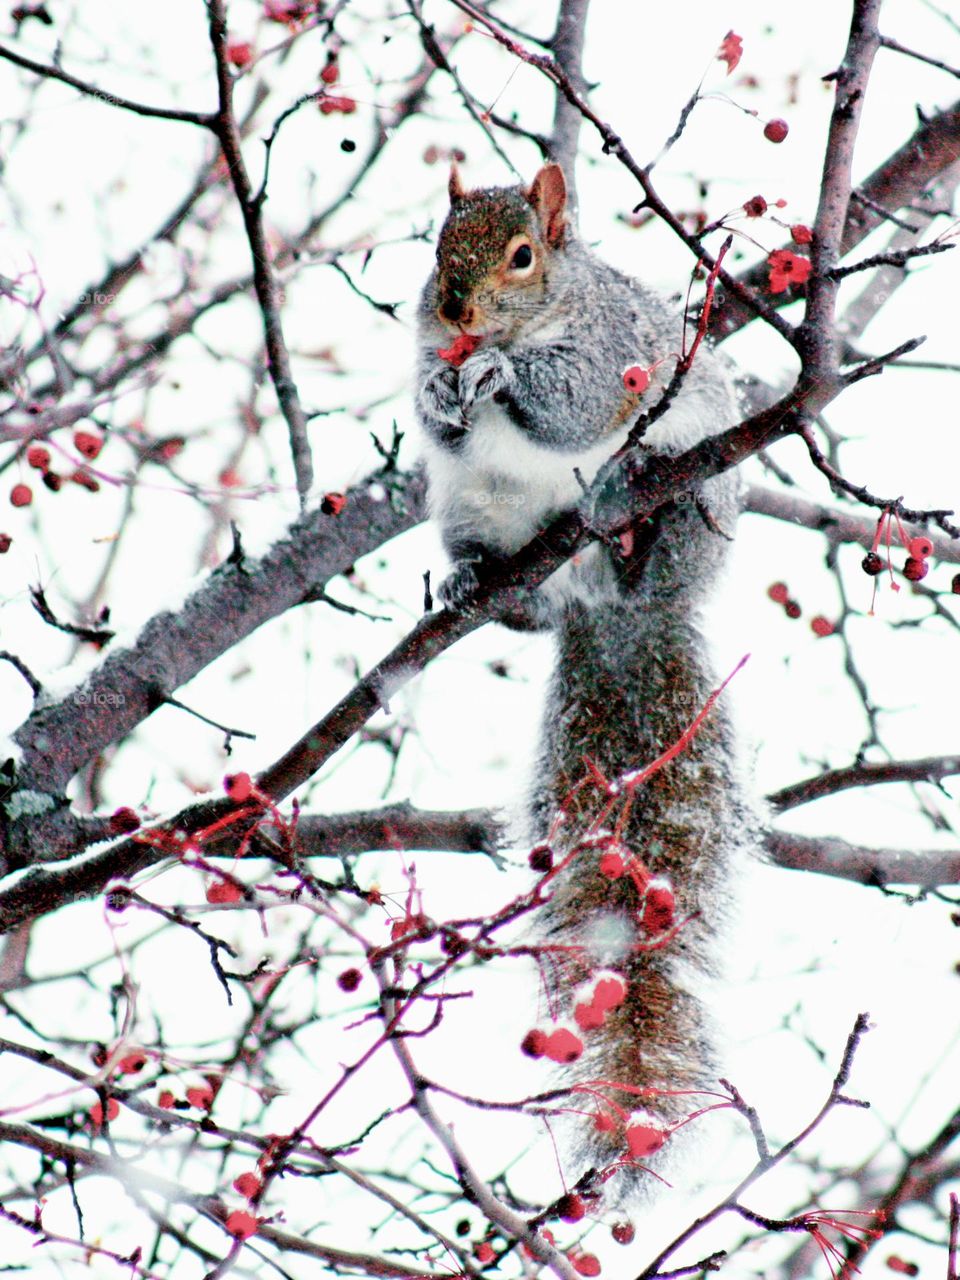 Squirrel eating fruit in snow